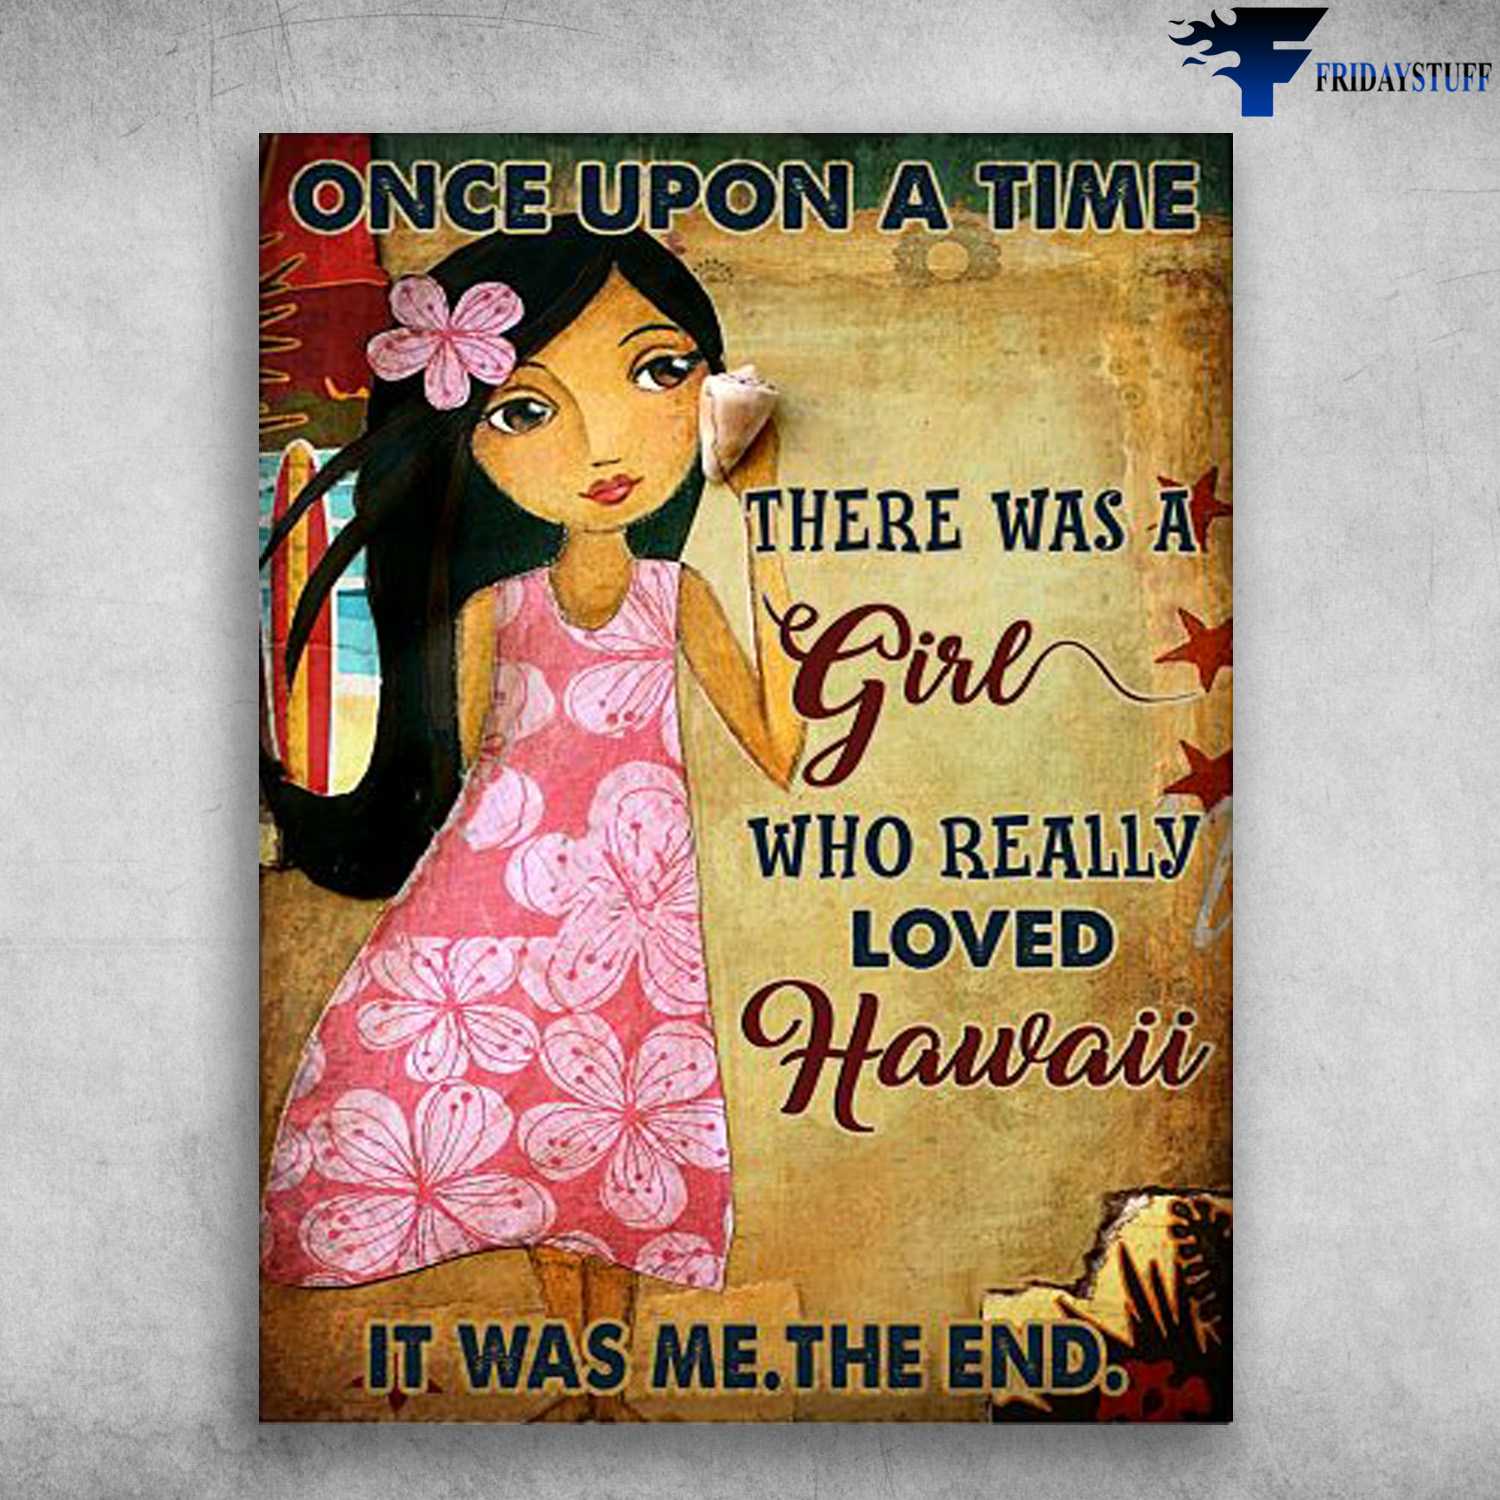 Hawaii Girl, Hawaii Lover - Once Upon A Time, There Was A Girl, Who Really Loved Hawaii, It Was Me, The End